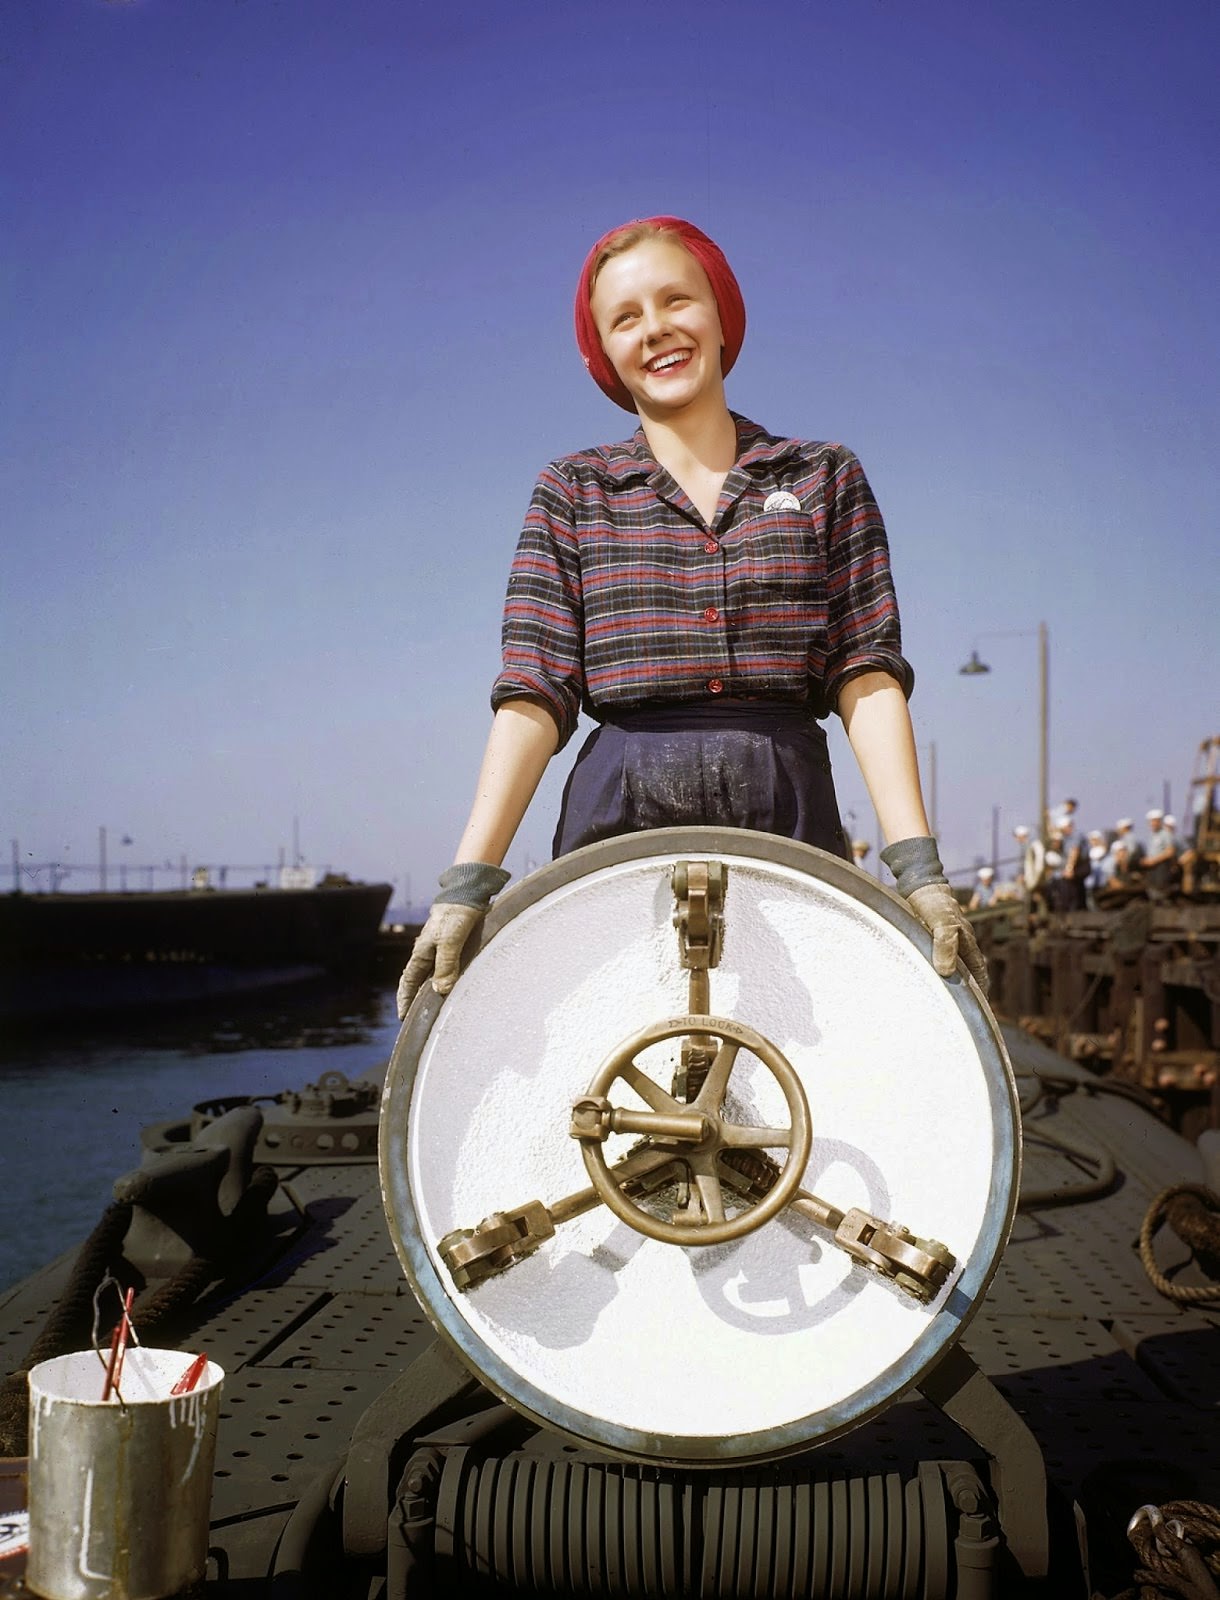 A worker at Electric Boat Co. in New London, Conn. in 1943.